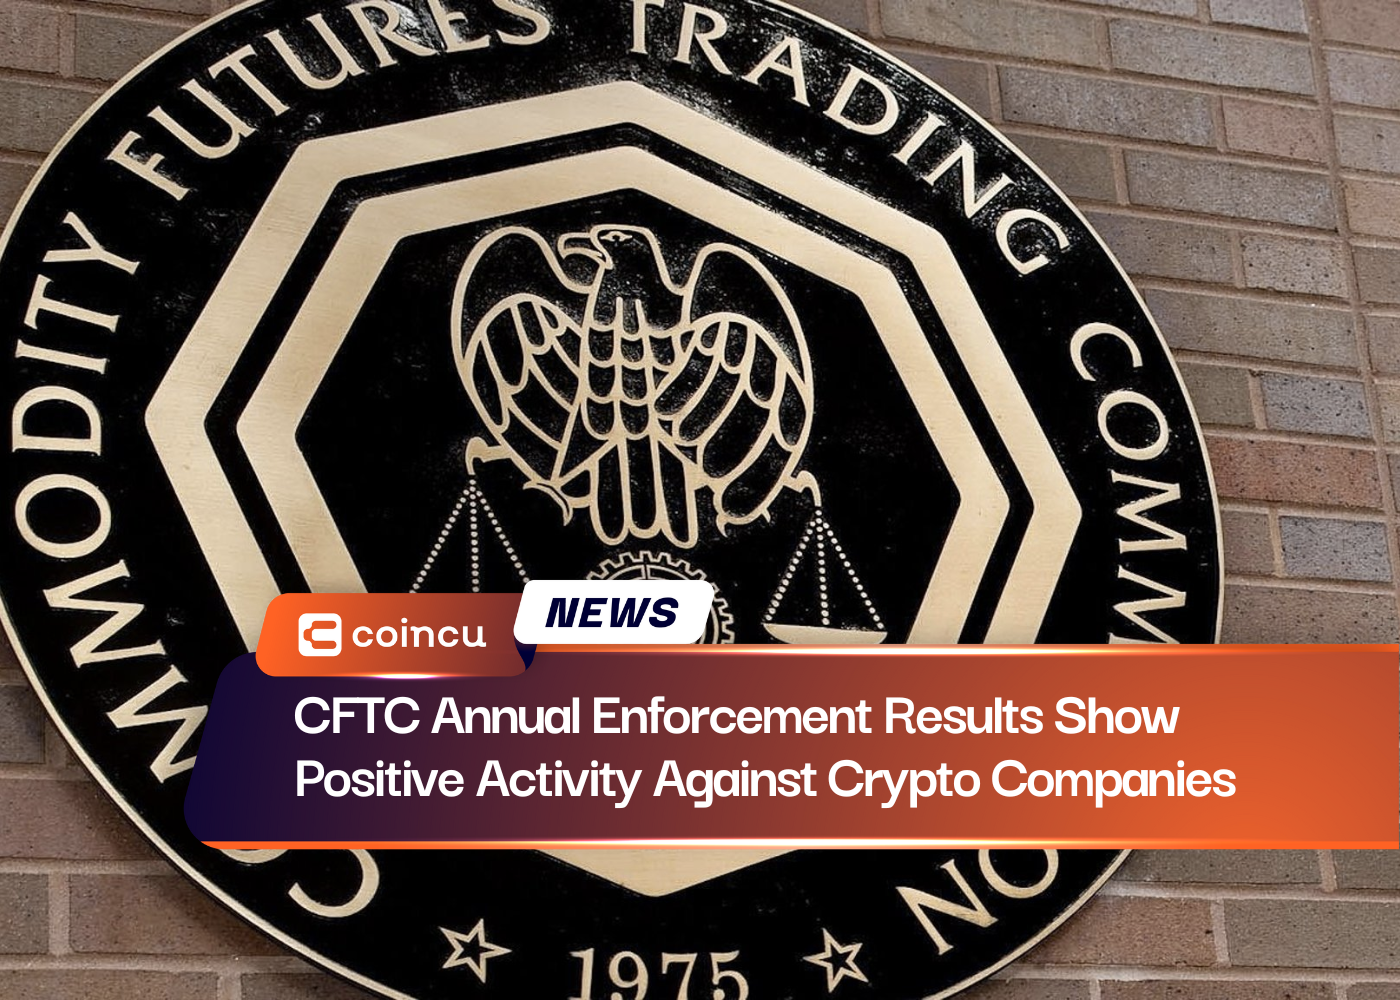 CFTC Annual Enforcement Results Show Positive Activity Against Crypto Companies